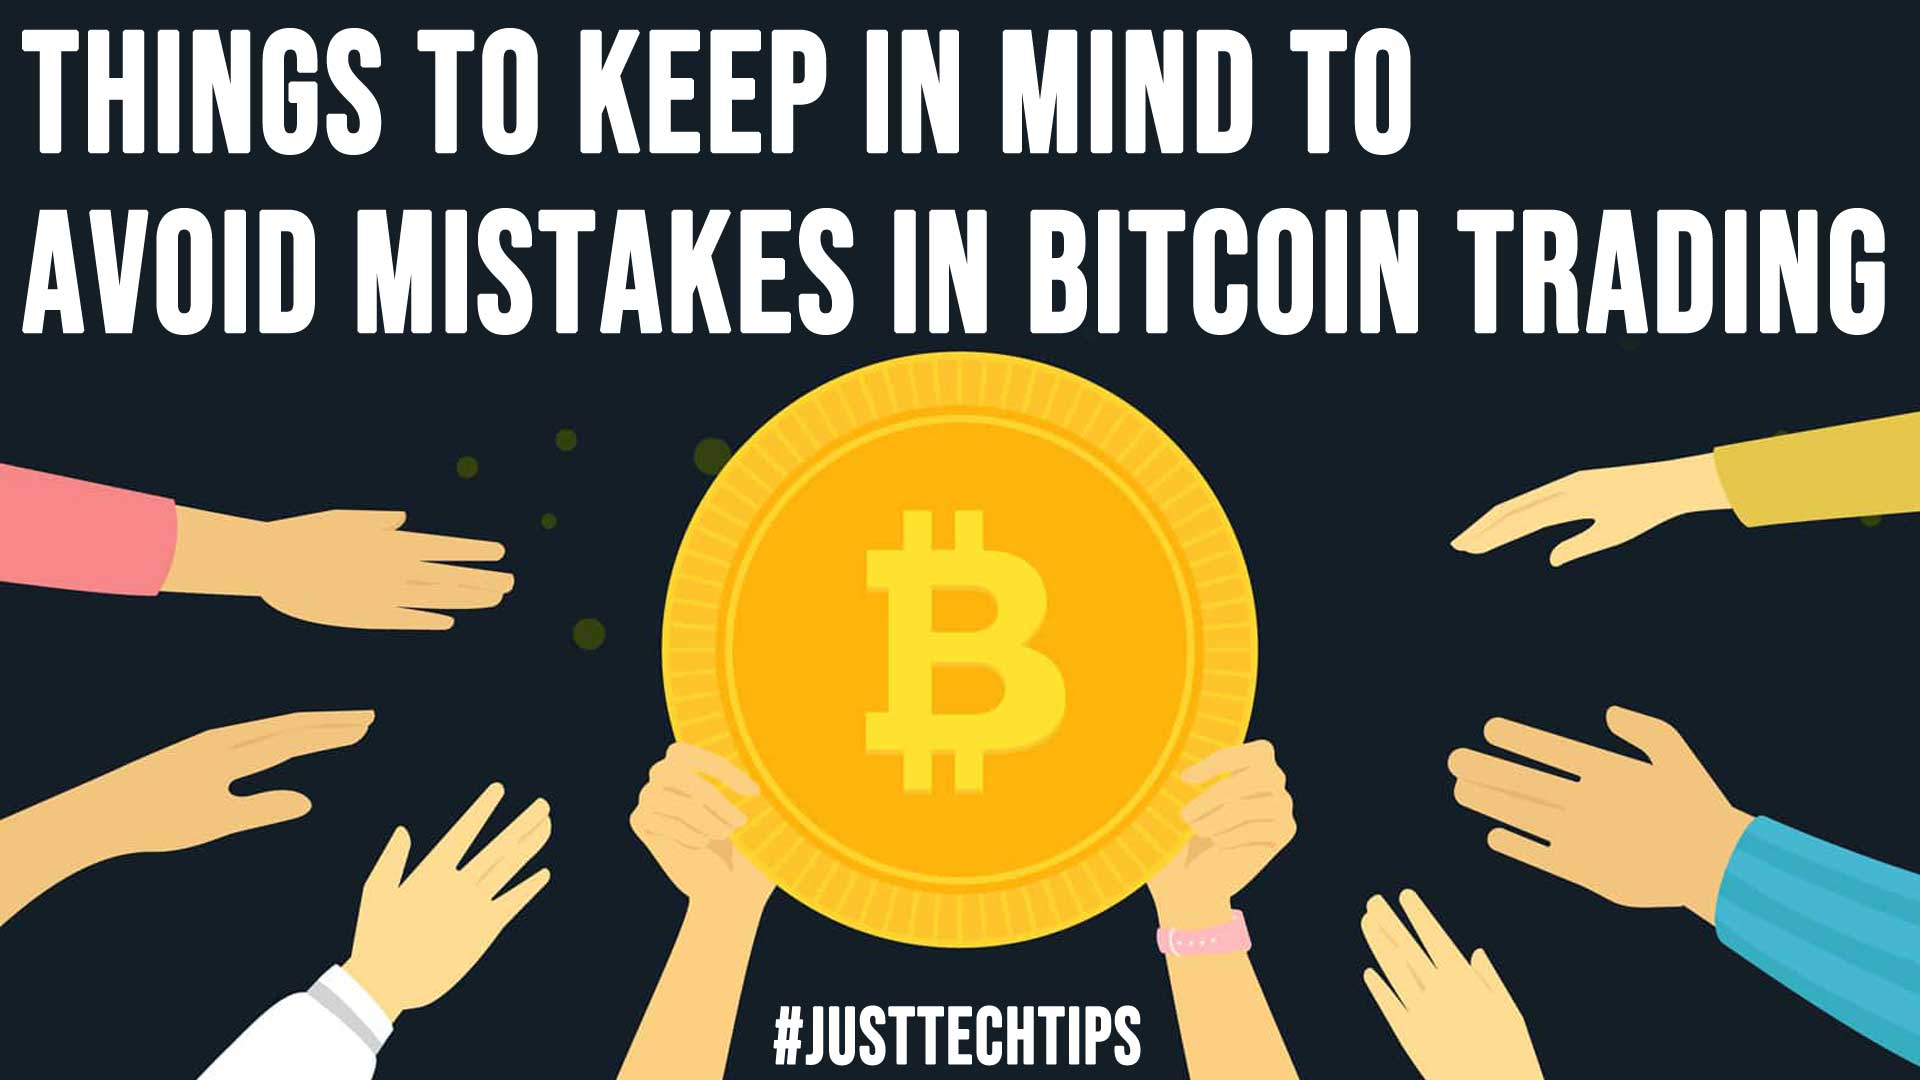 Things to Keep in Mind to Avoid Mistakes in Bitcoin Trading